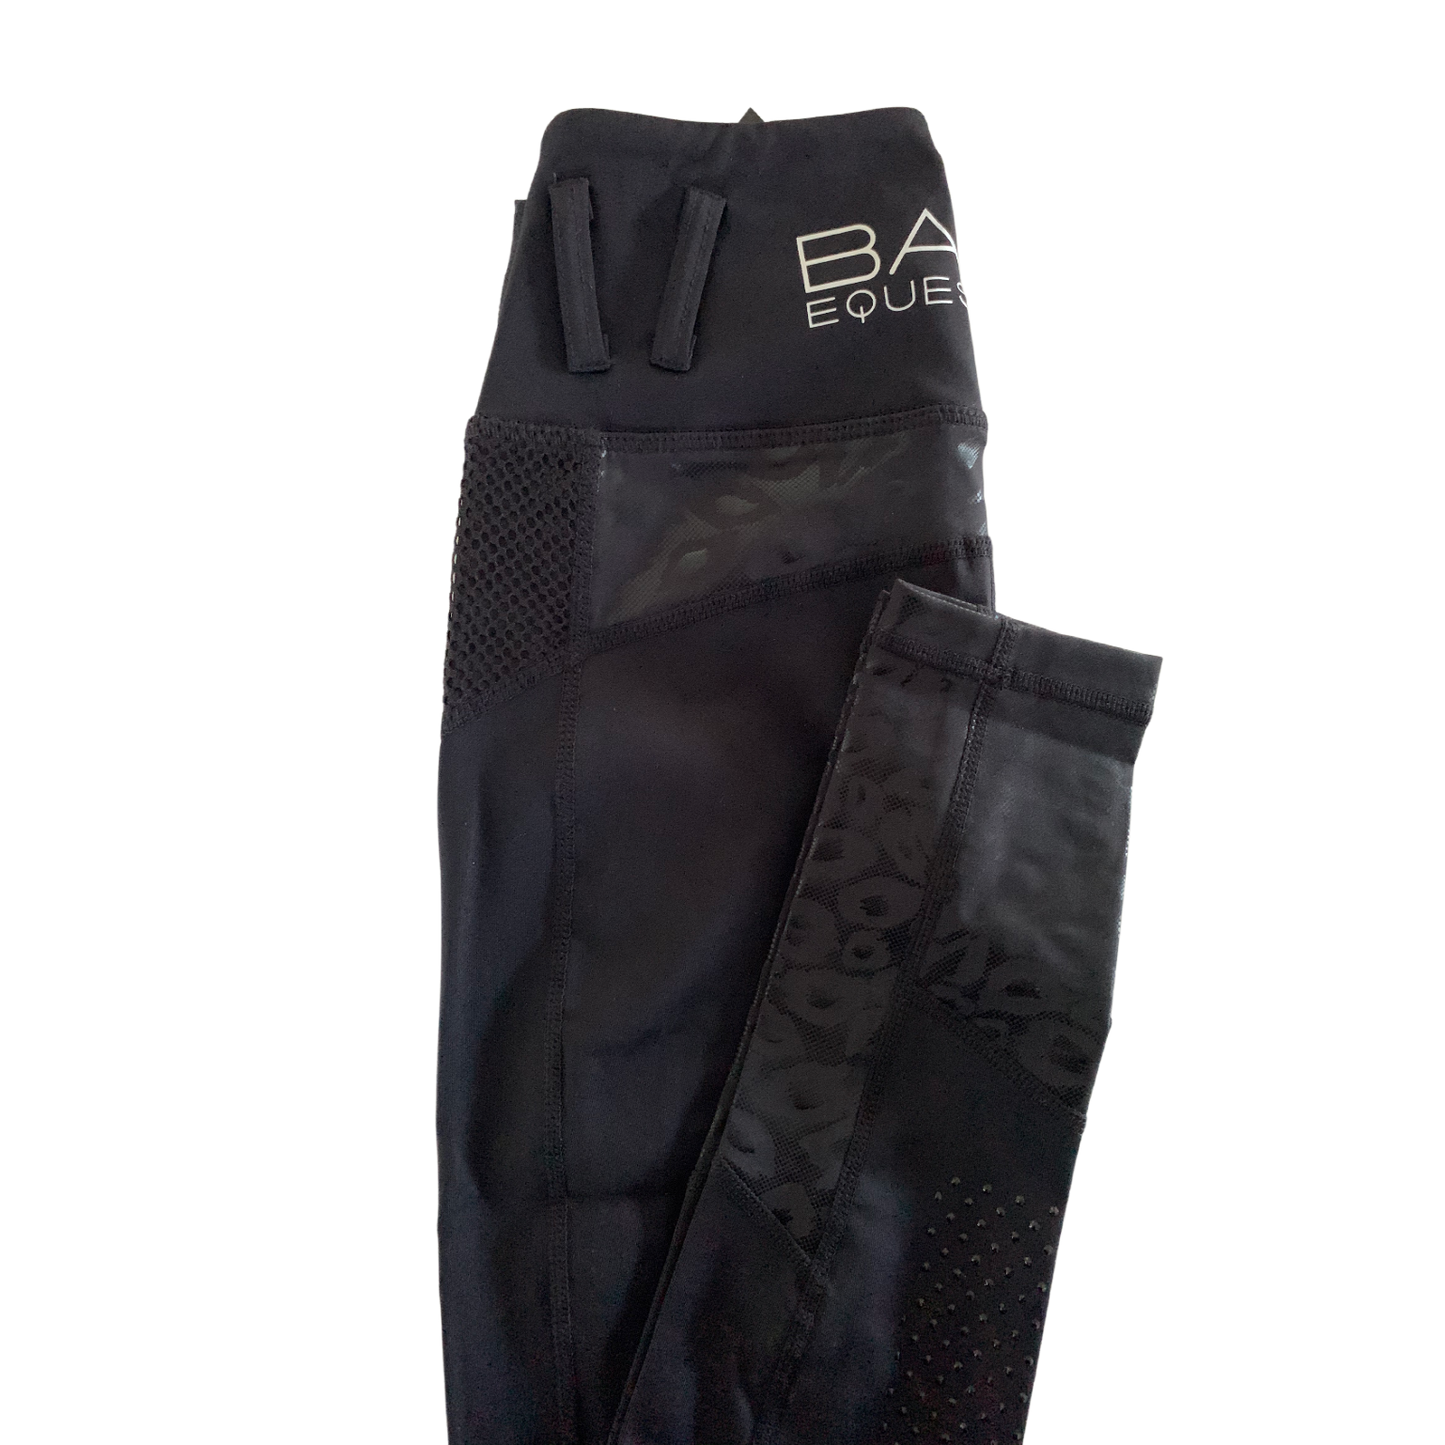 Black horse riding tights with grip pattern and mesh details.